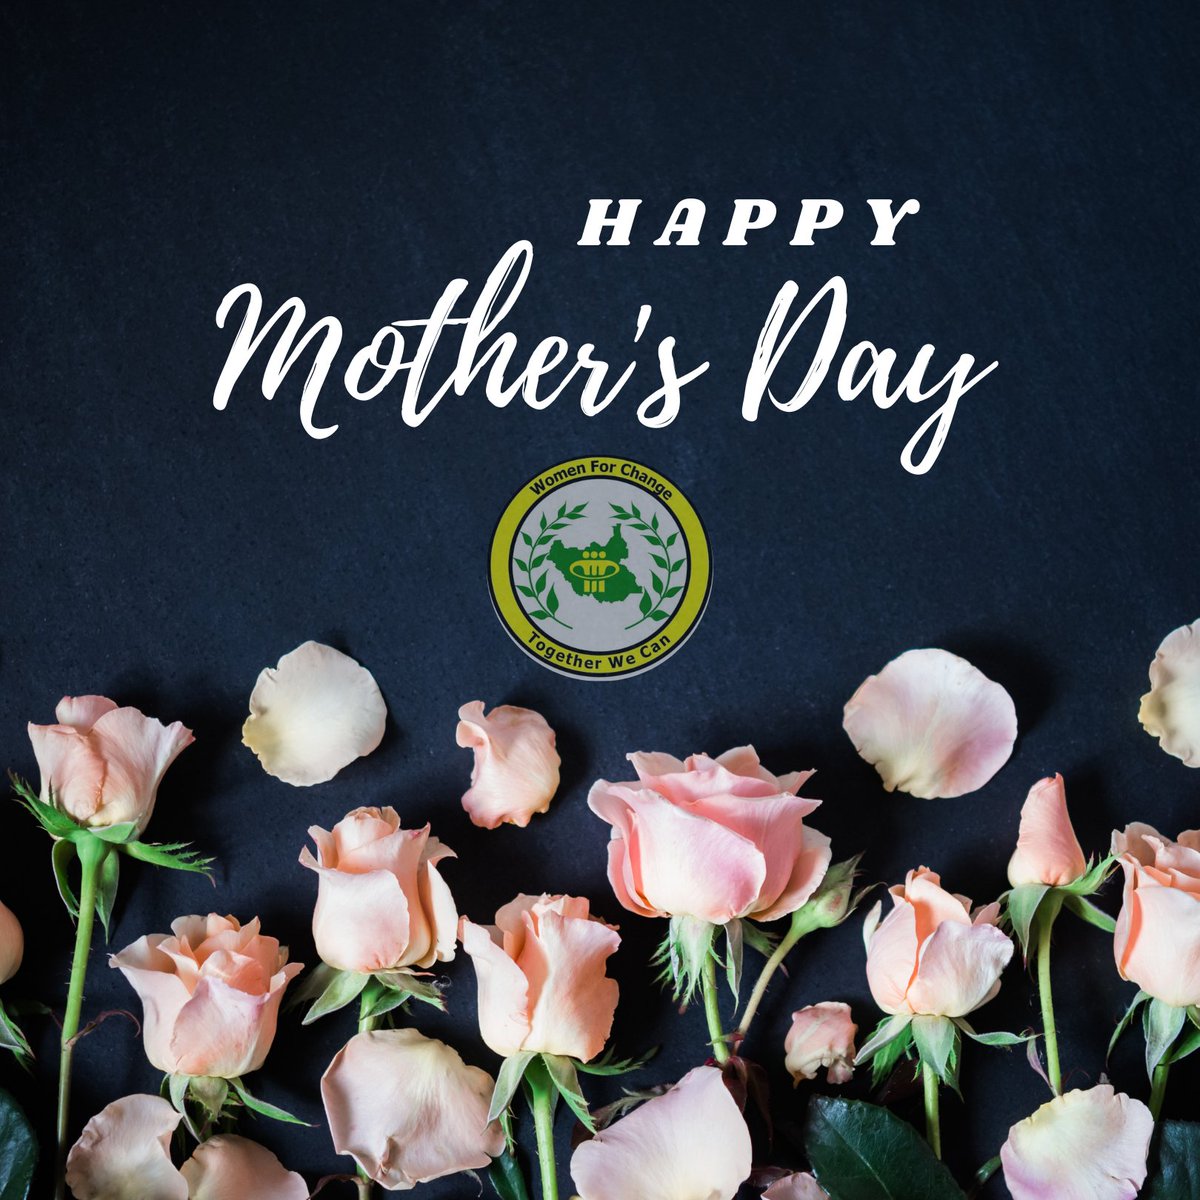 To the most wonderful mother, thank you for everything you do. Happy Mother's Day to the most special mothers across the beautiful nation of South Sudan and beyond. We appreciate you more than words can say. #SSOX